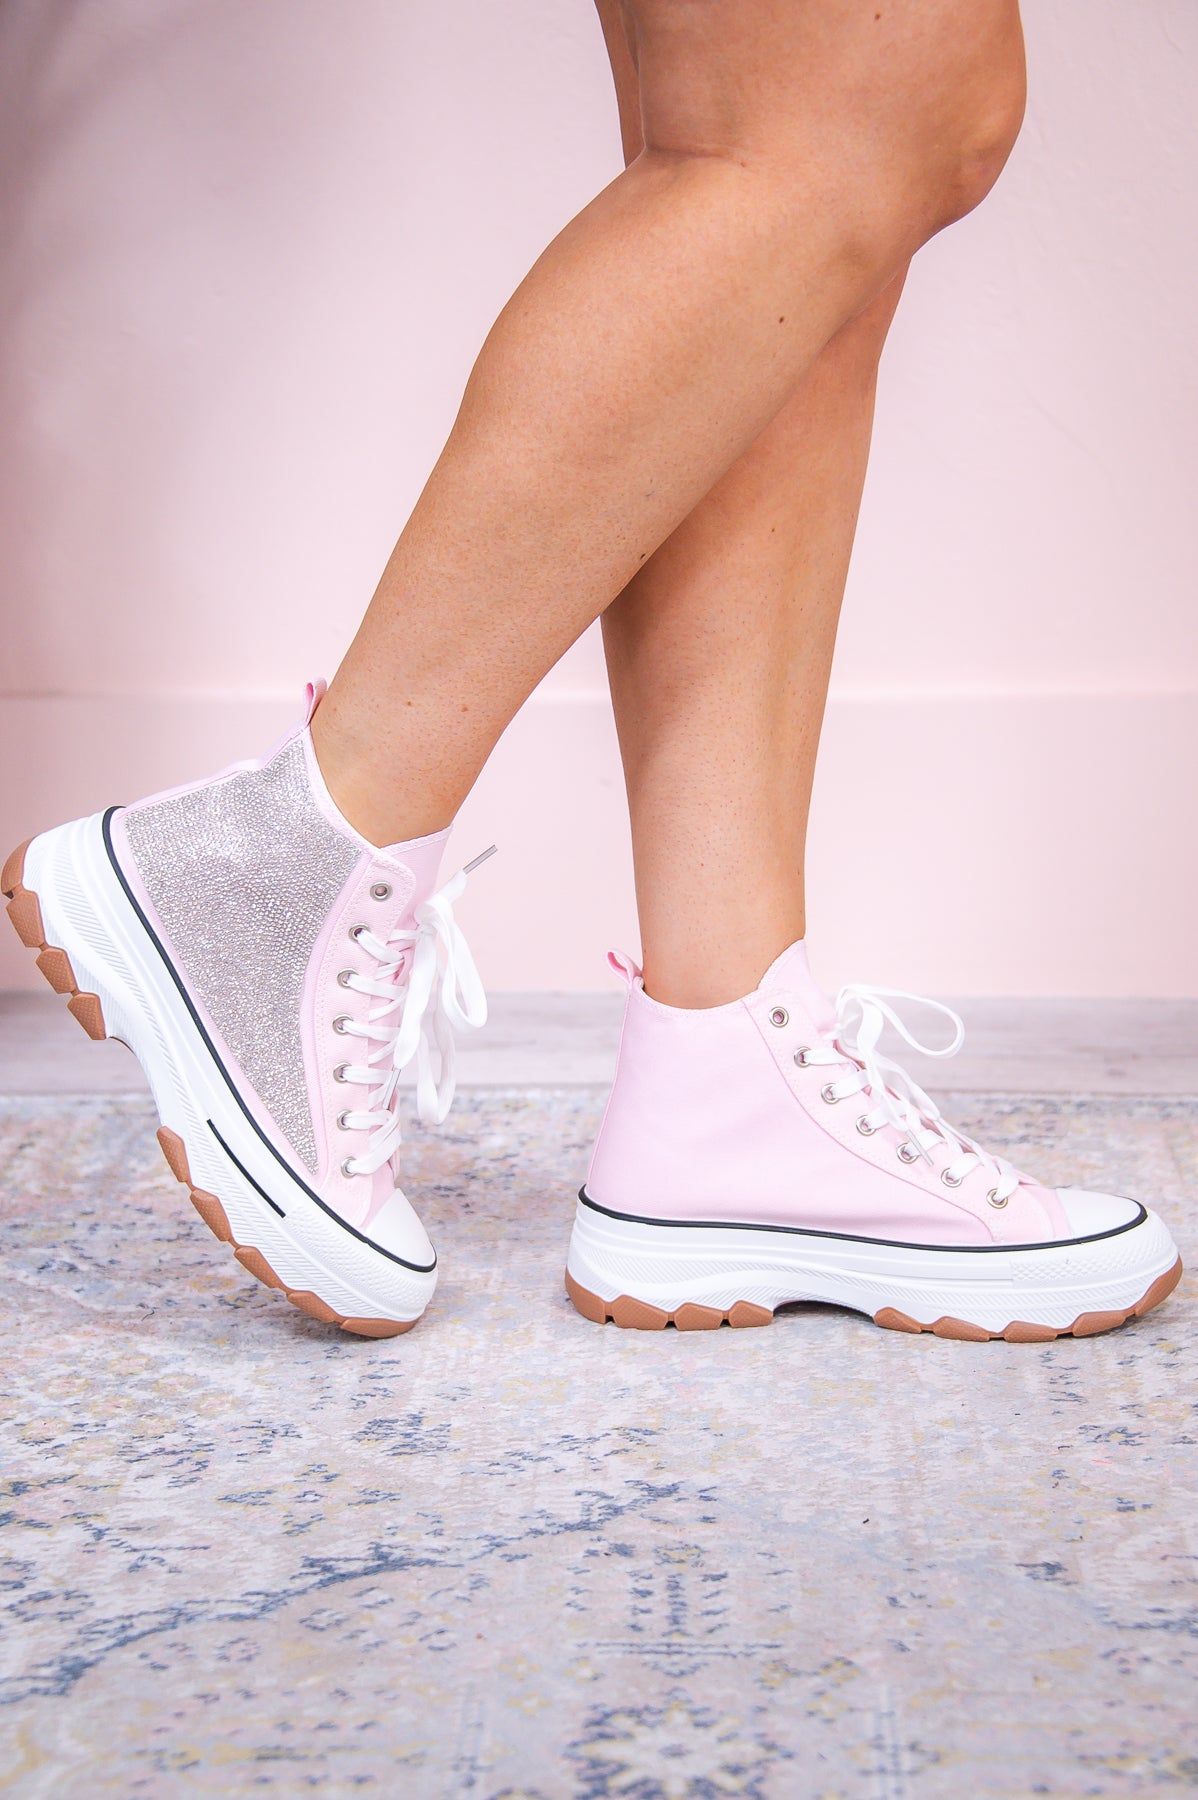 Successfully Stylin' Pink/Silver Bling Platform Sneakers - SHO2667PK